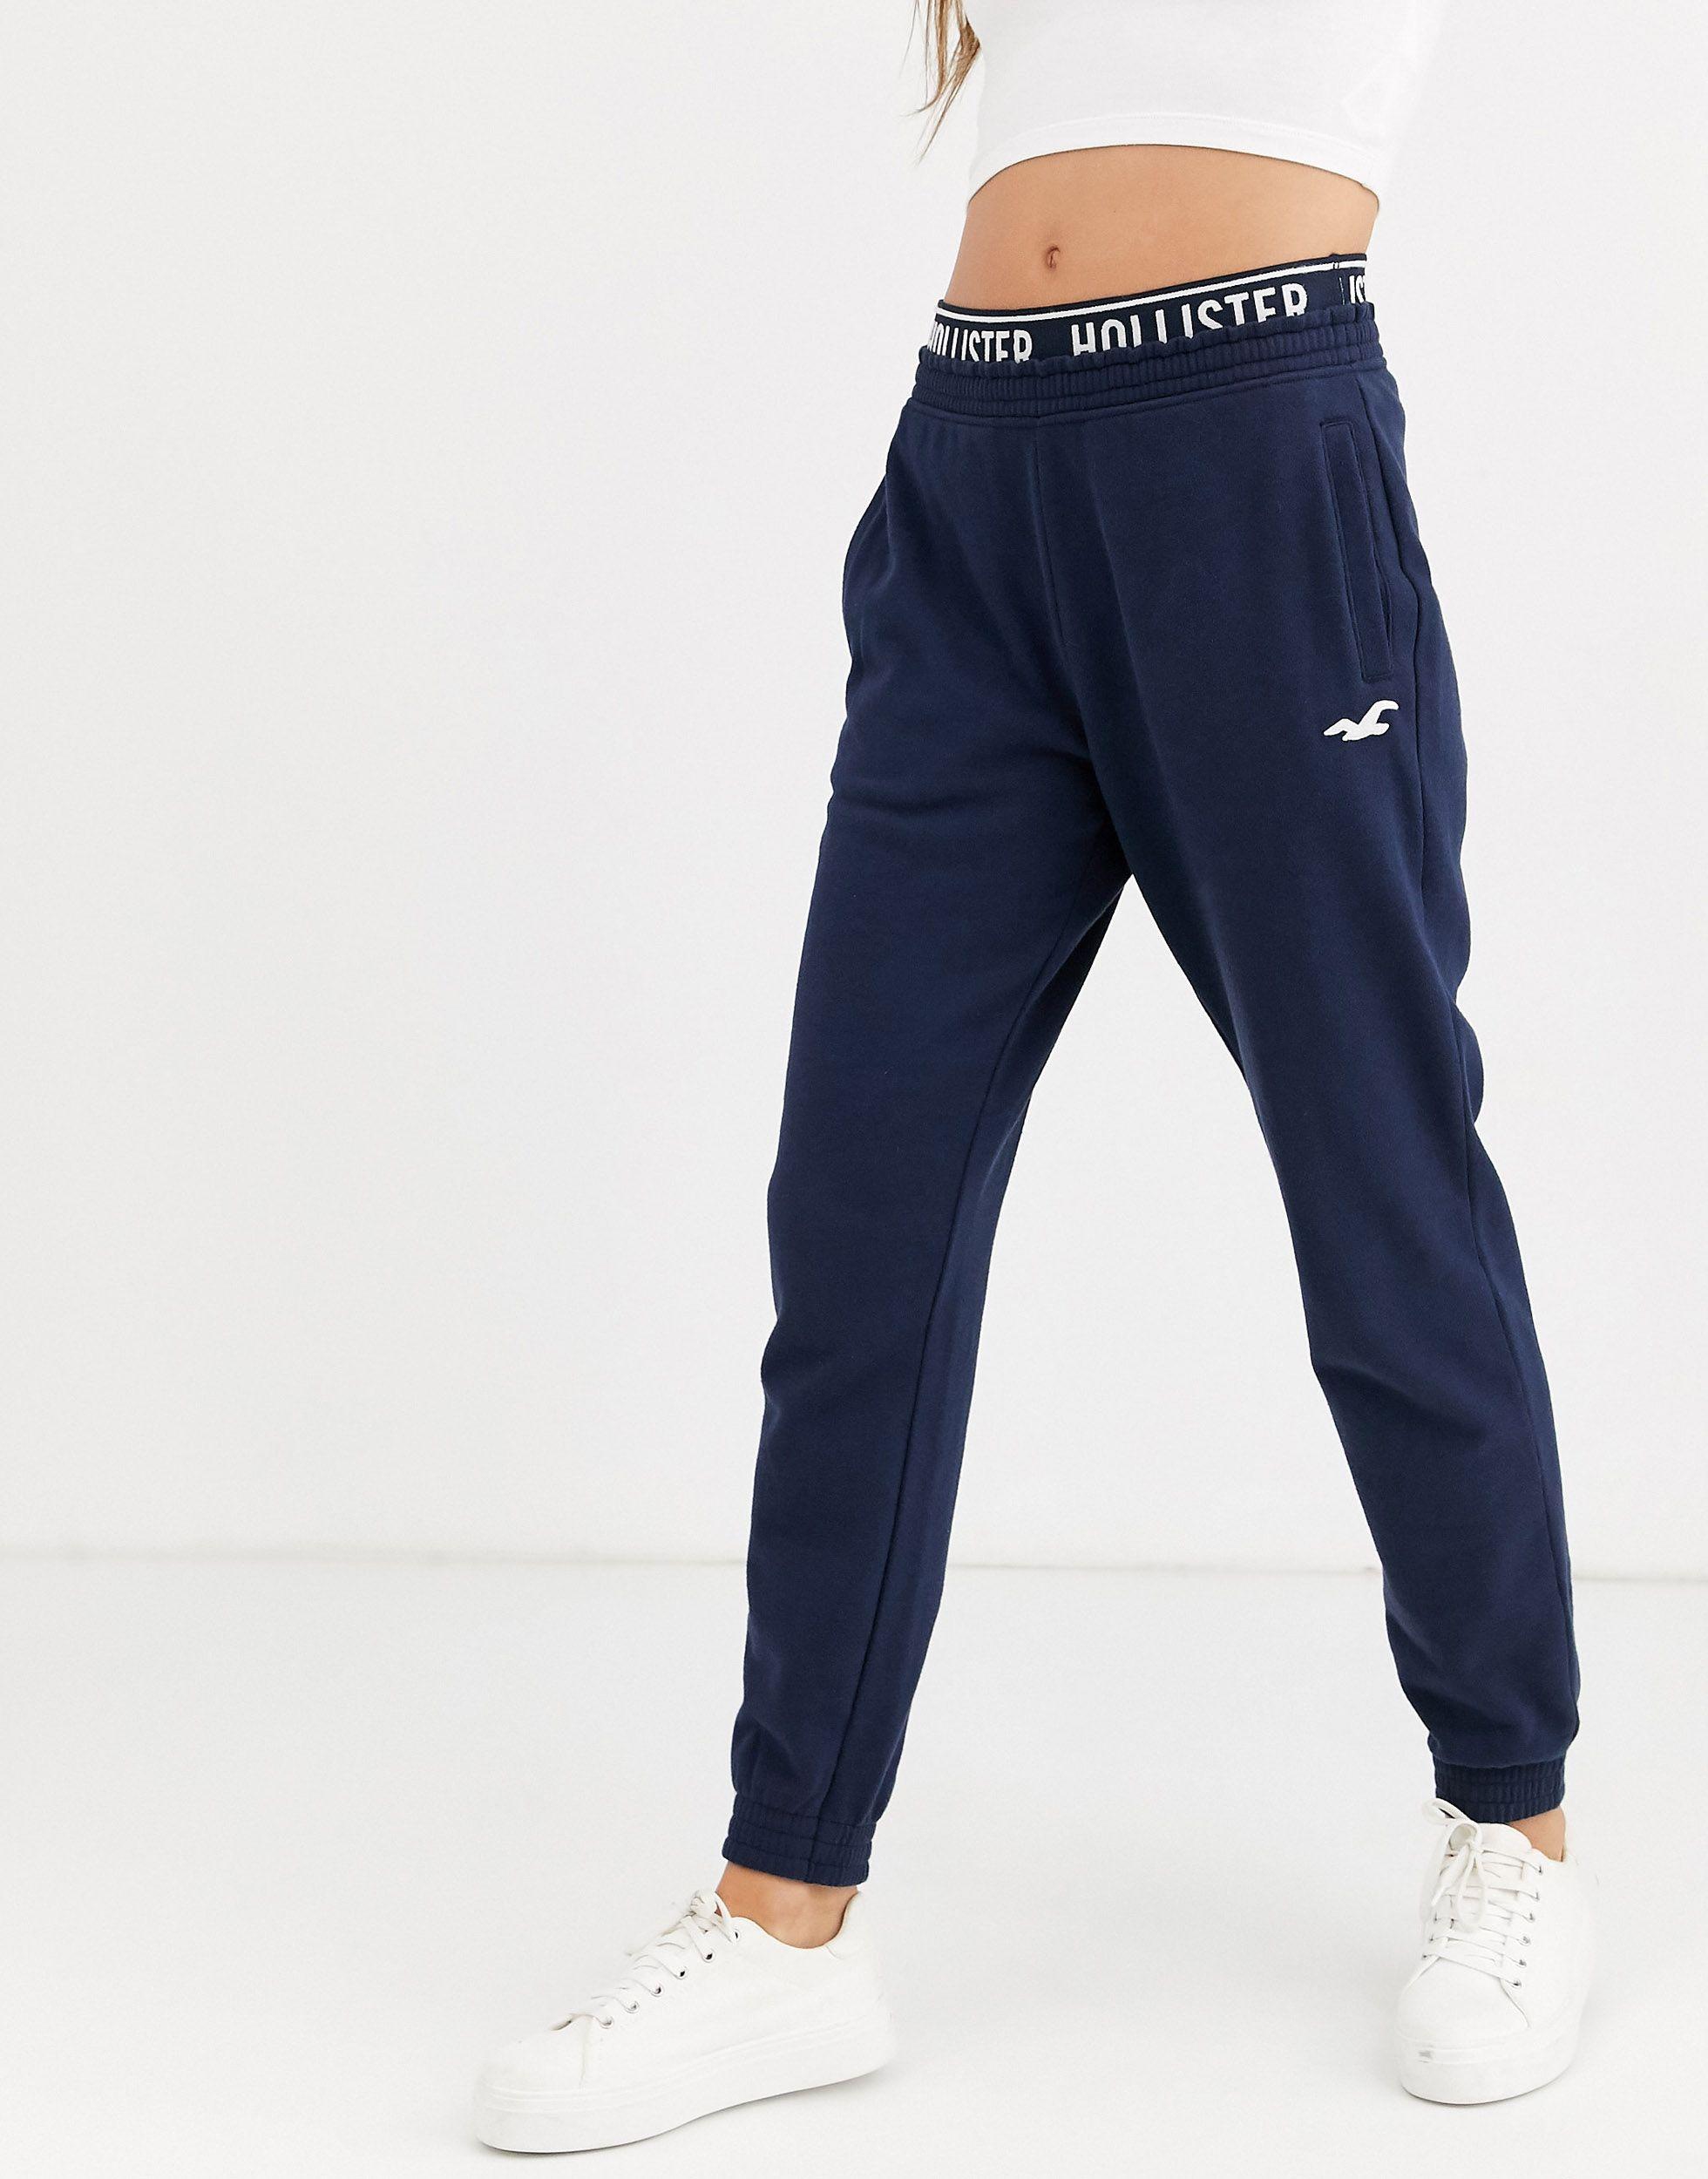 Hollister Sweatpants Blue - $18 (64% Off Retail) - From Sara